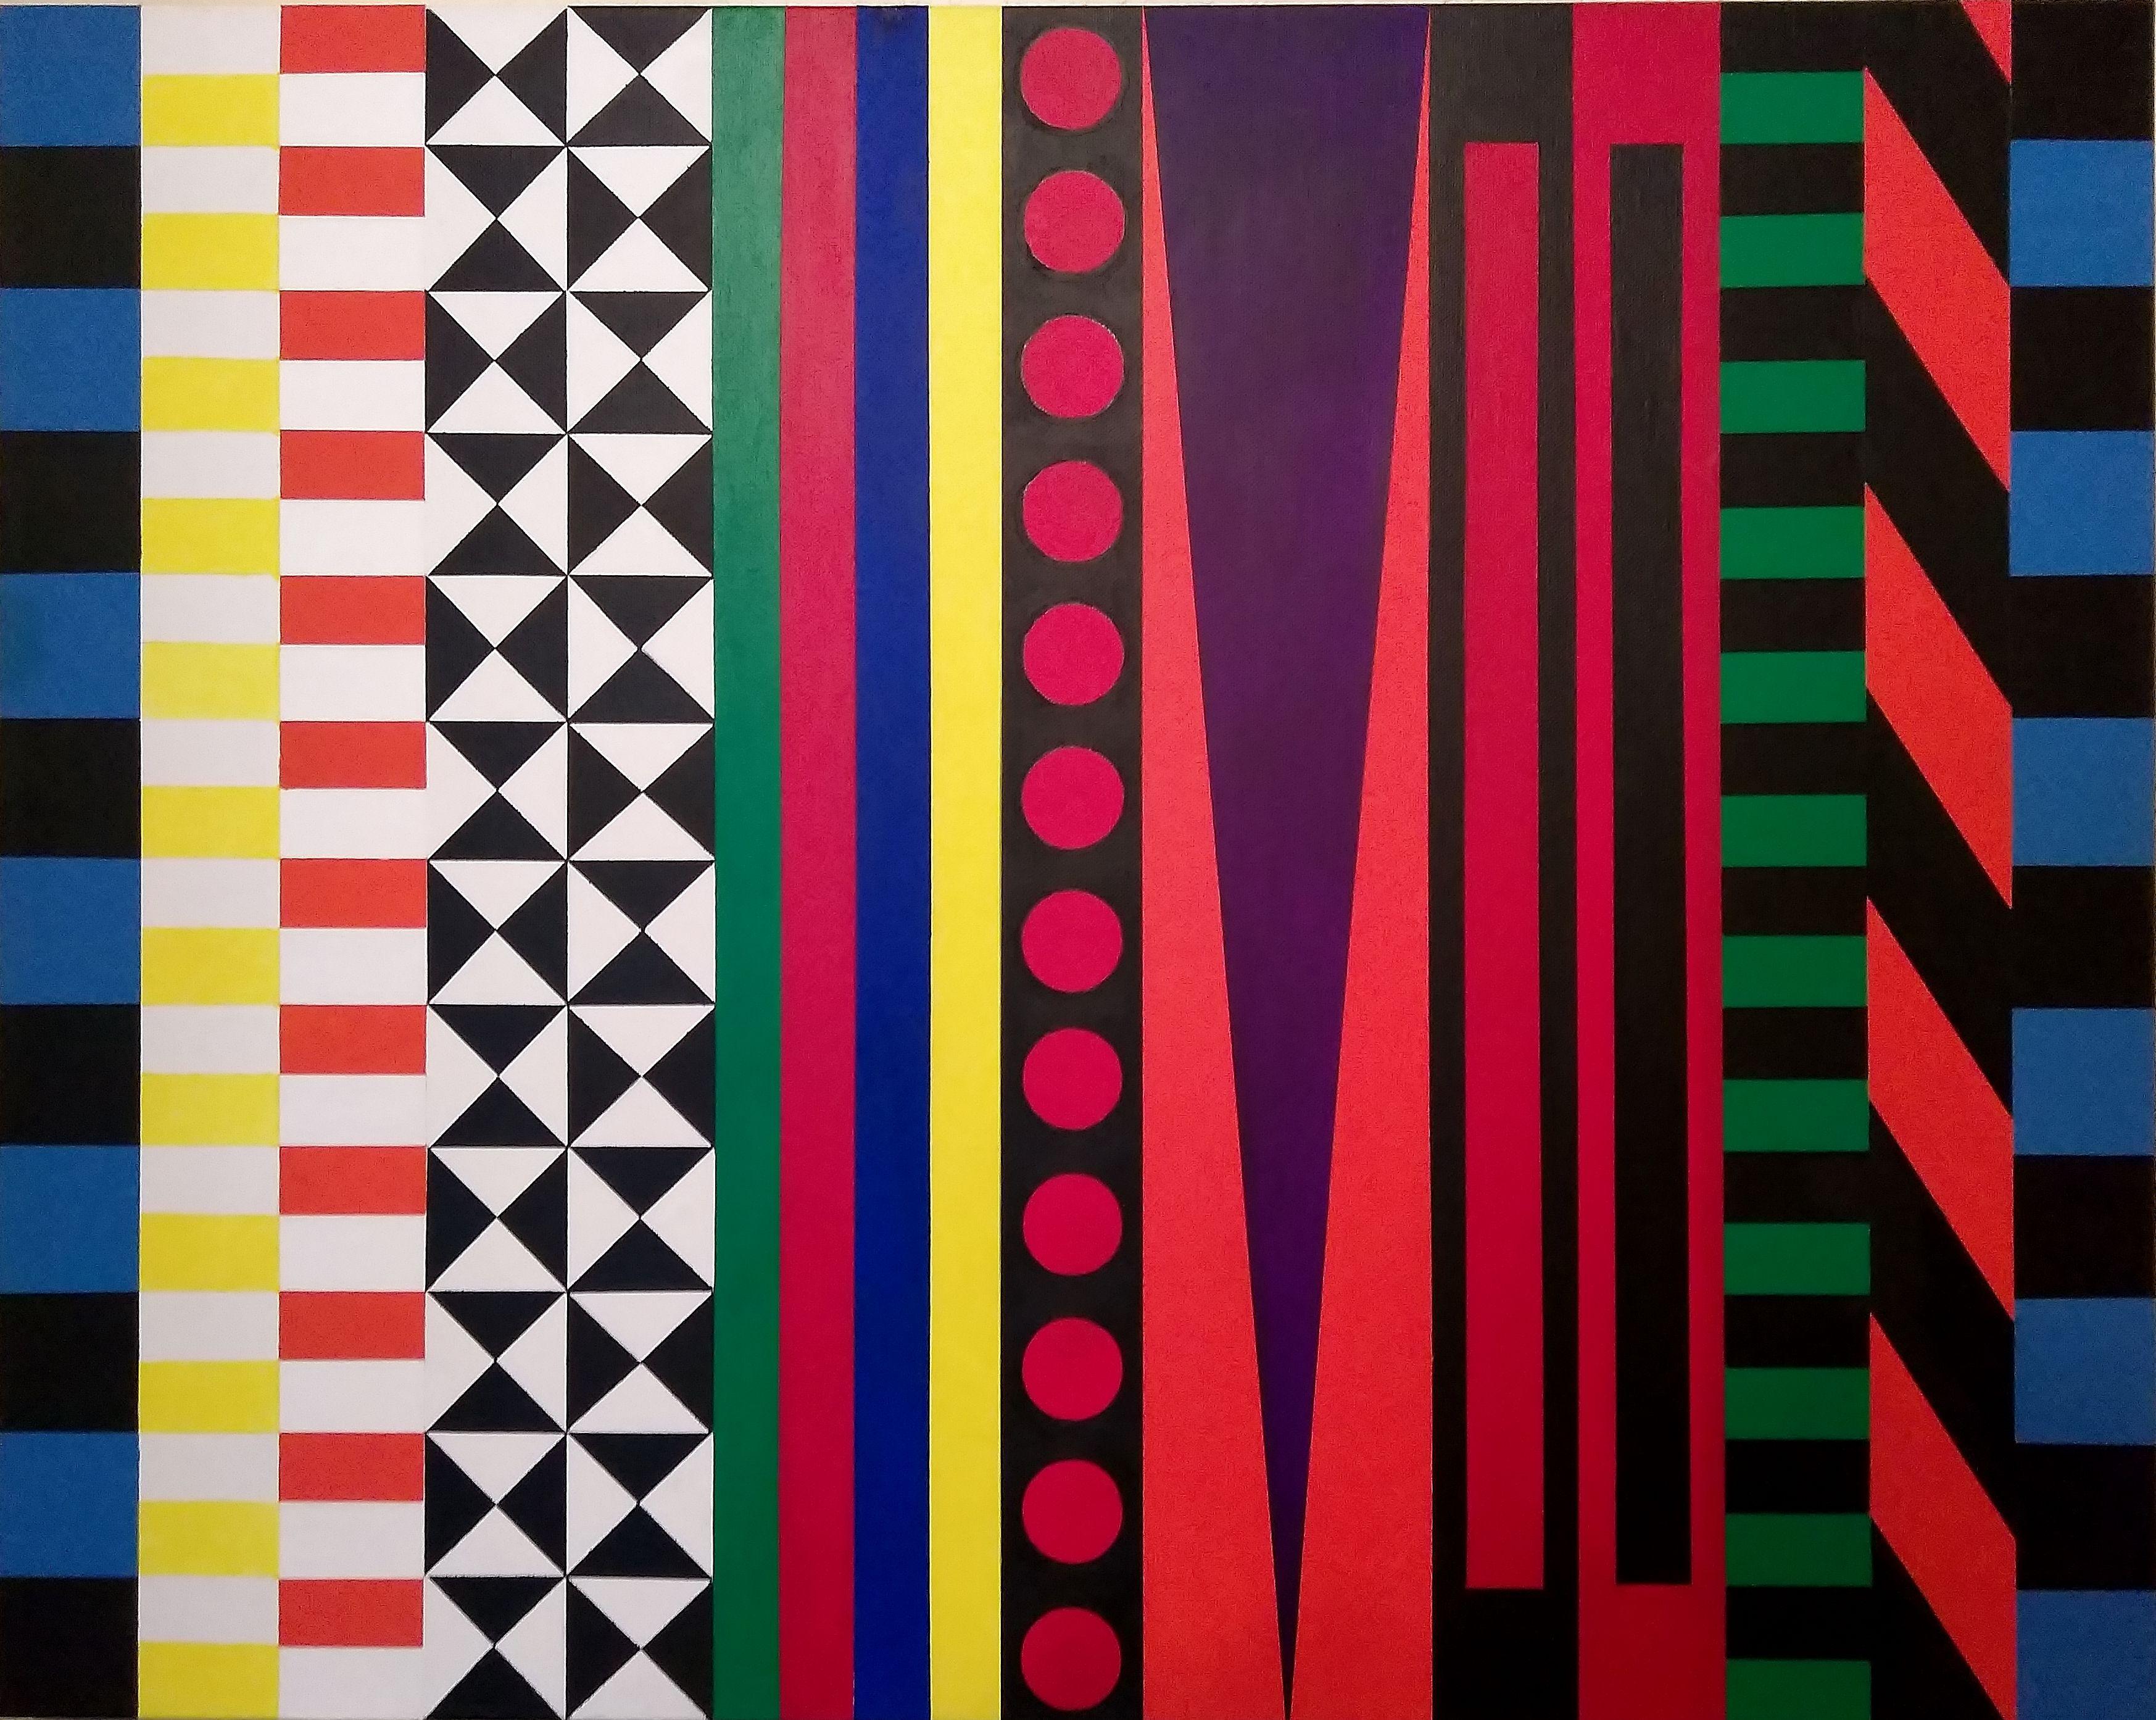 Juan Jose Hoyos Quiles Abstract Painting - SeÃ±ales Numero Tres (Signals Number Three) 2017, Painting, Acrylic on Canvas